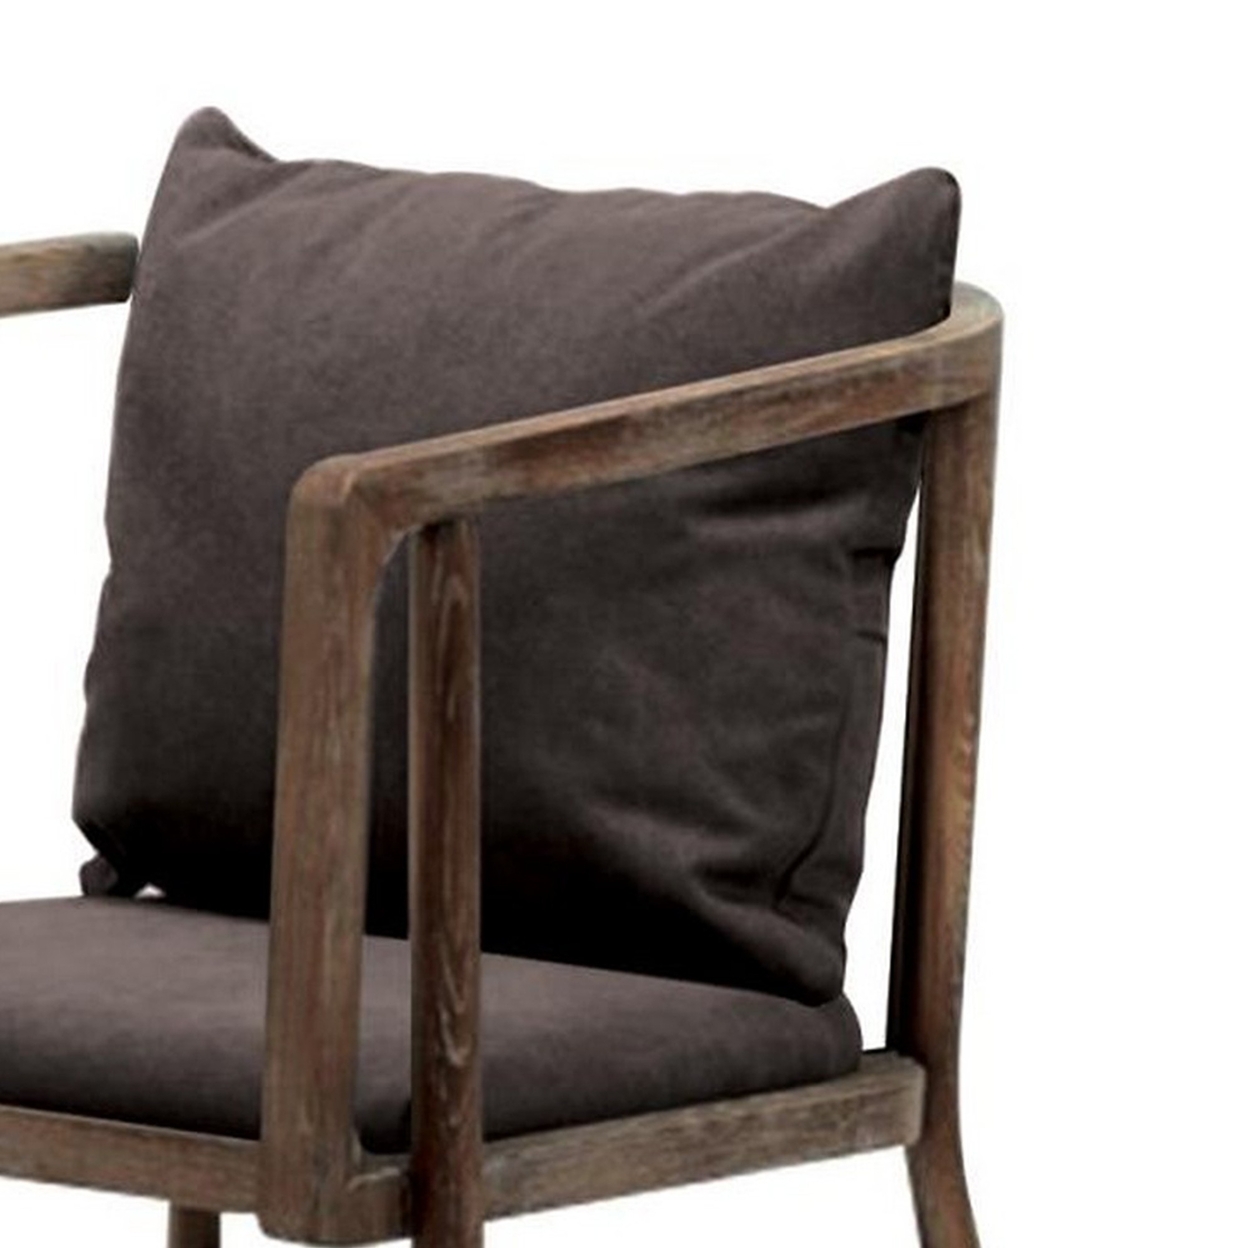 26 Inch Modern Accent Armchair With Gray Linen Padded Cushions, Wood Frame- Saltoro Sherpi